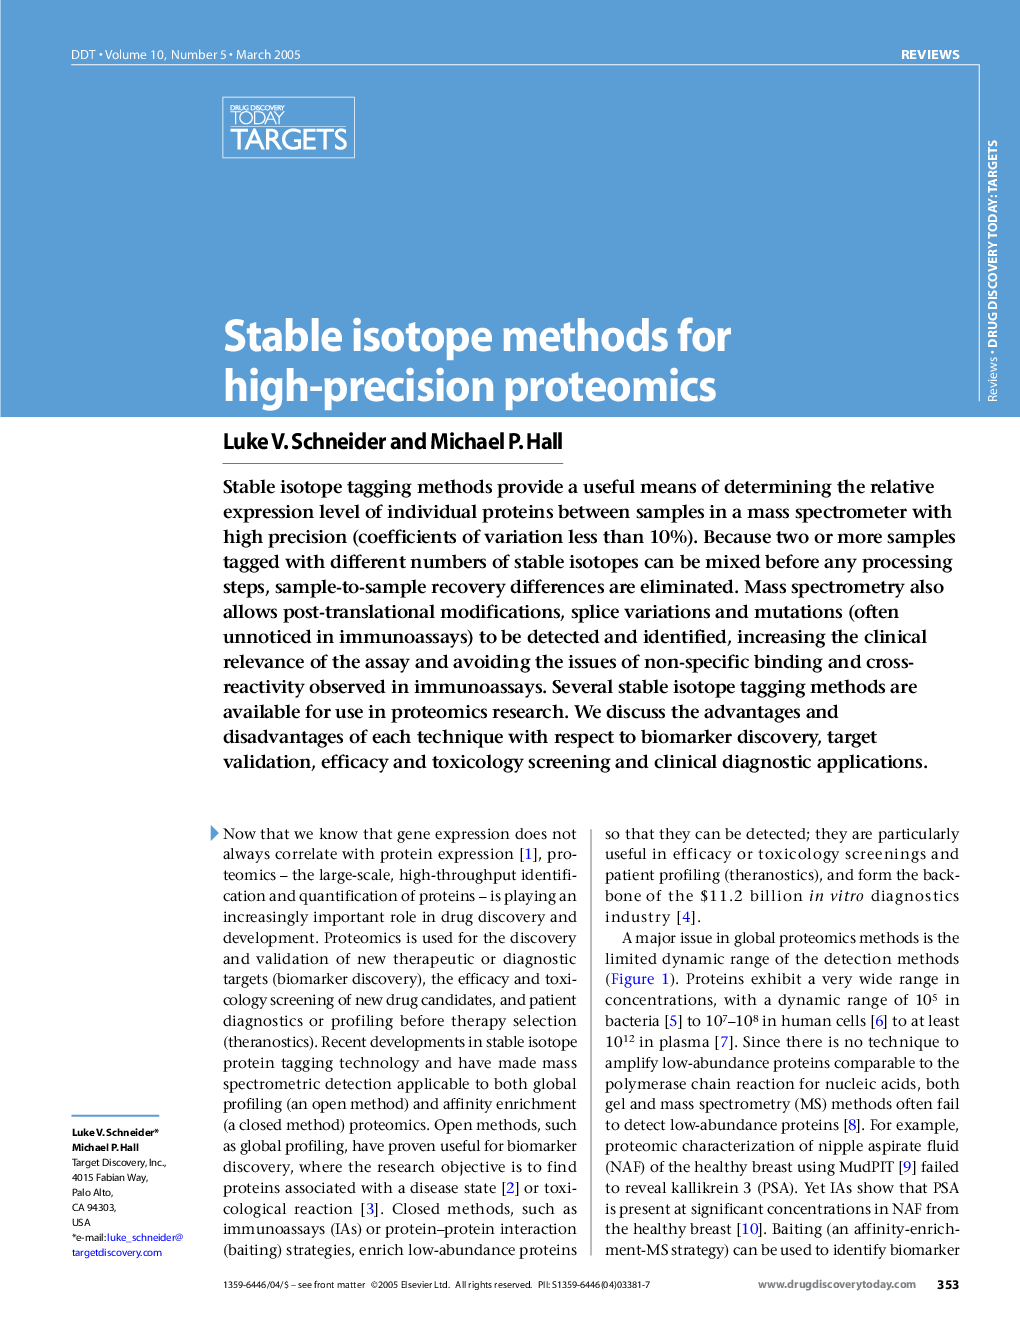 Stable isotope methods for high-precision proteomics